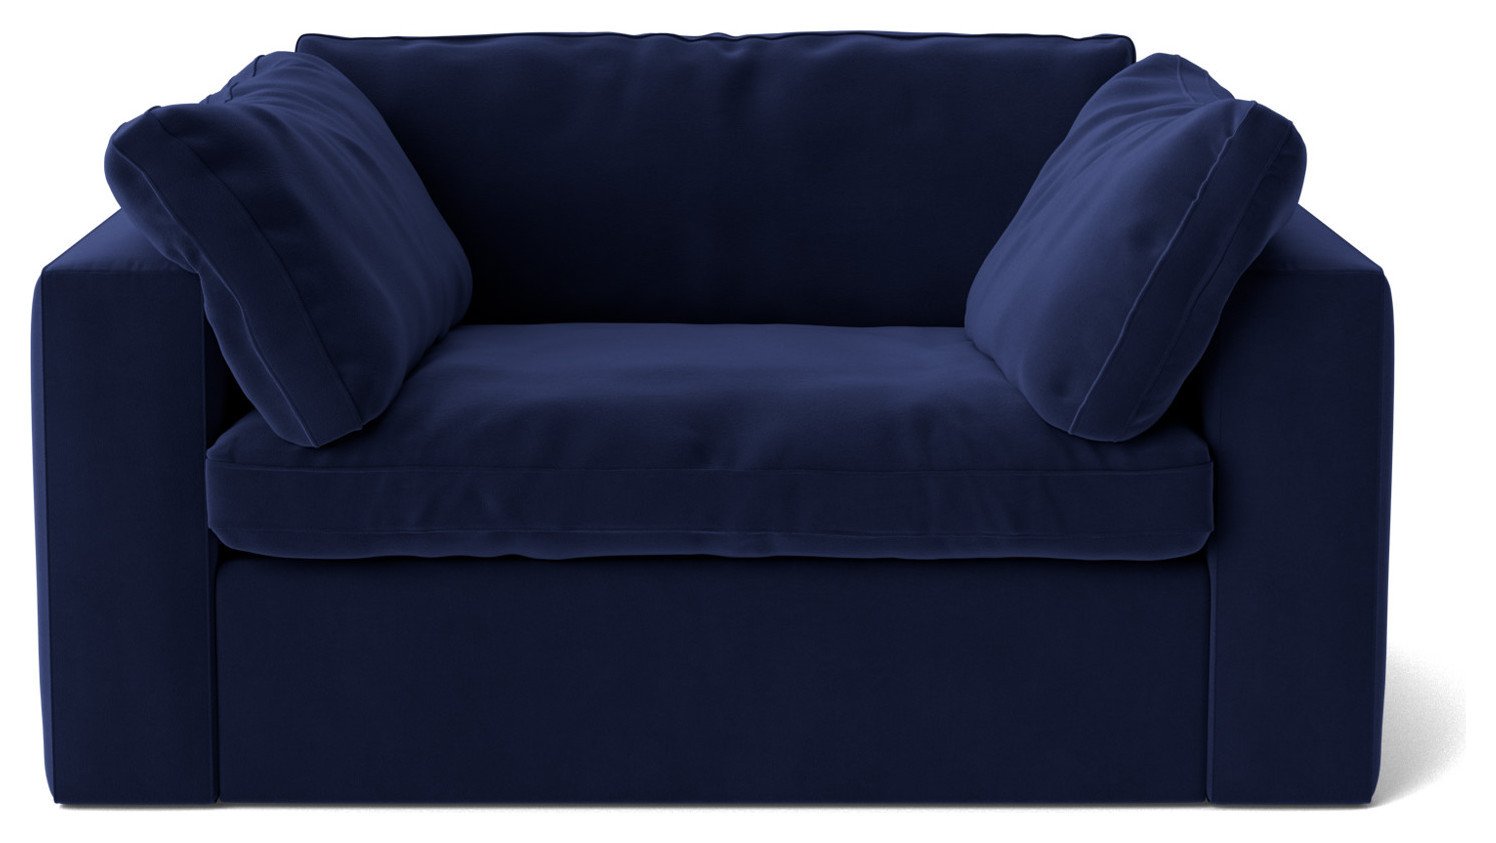 Swoon Seattle Velvet Cuddle Chair - Ink Blue